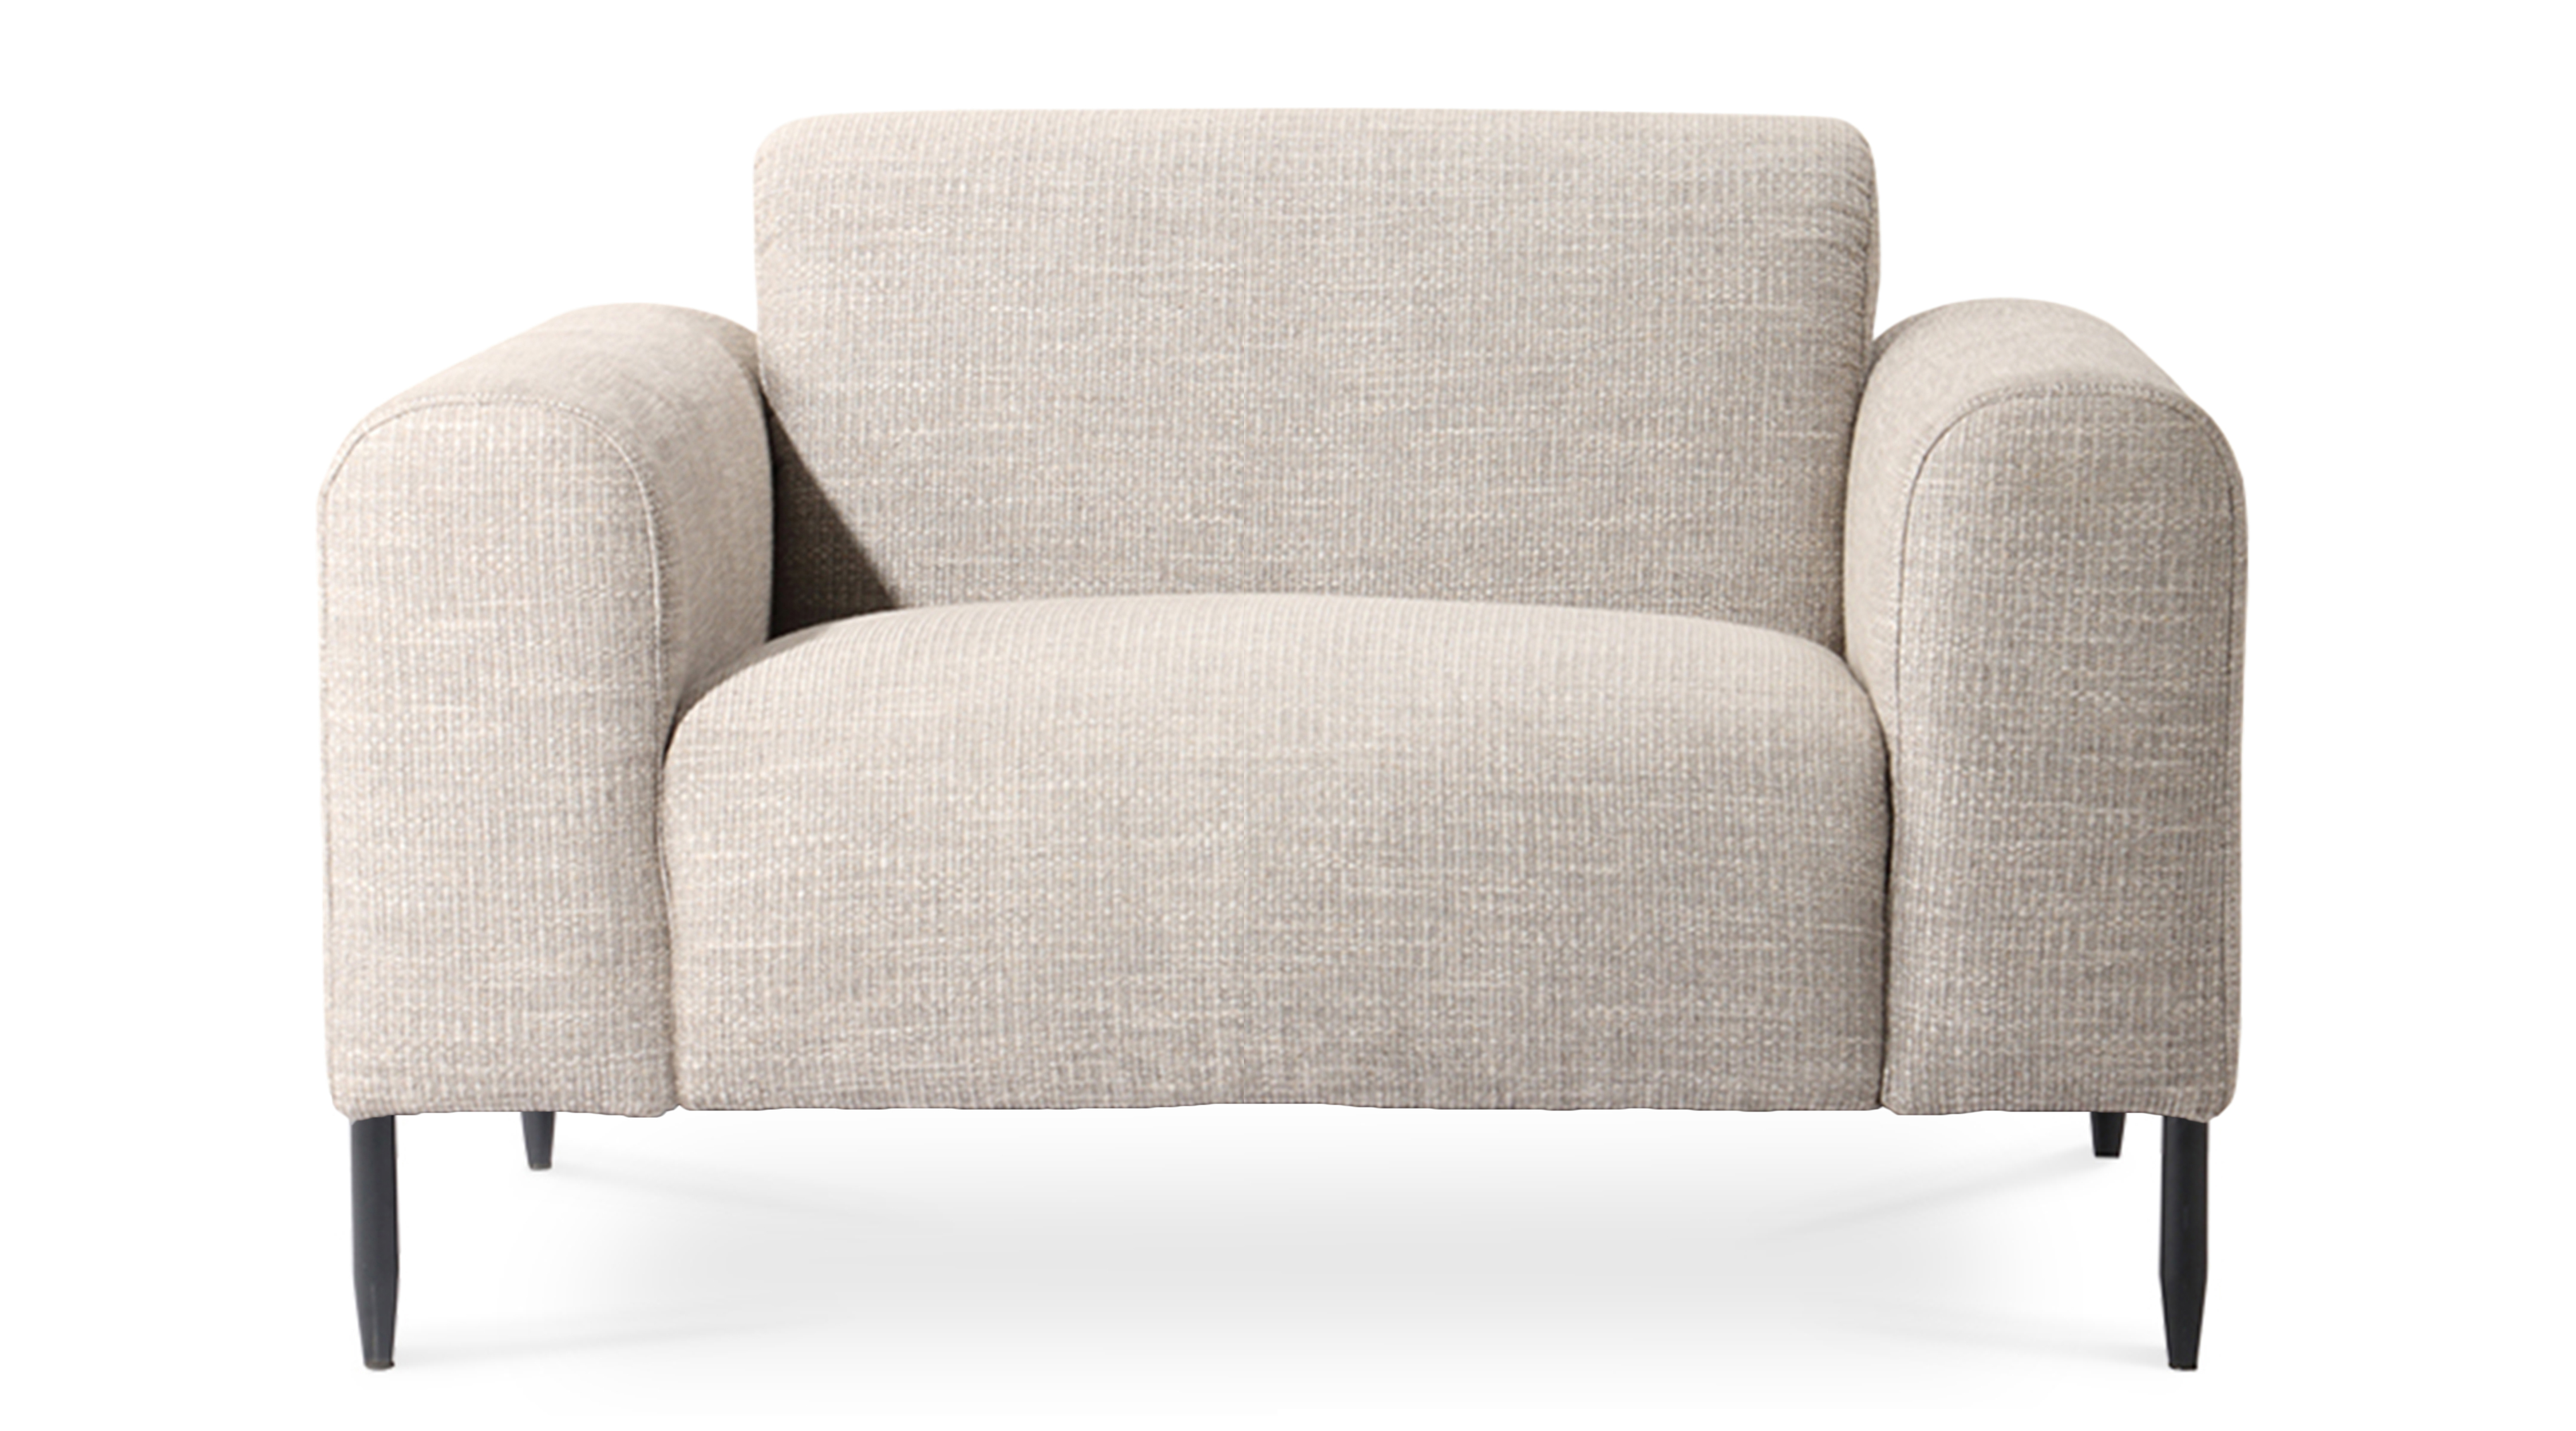 WS - District single sofa - Light Grey (Front)